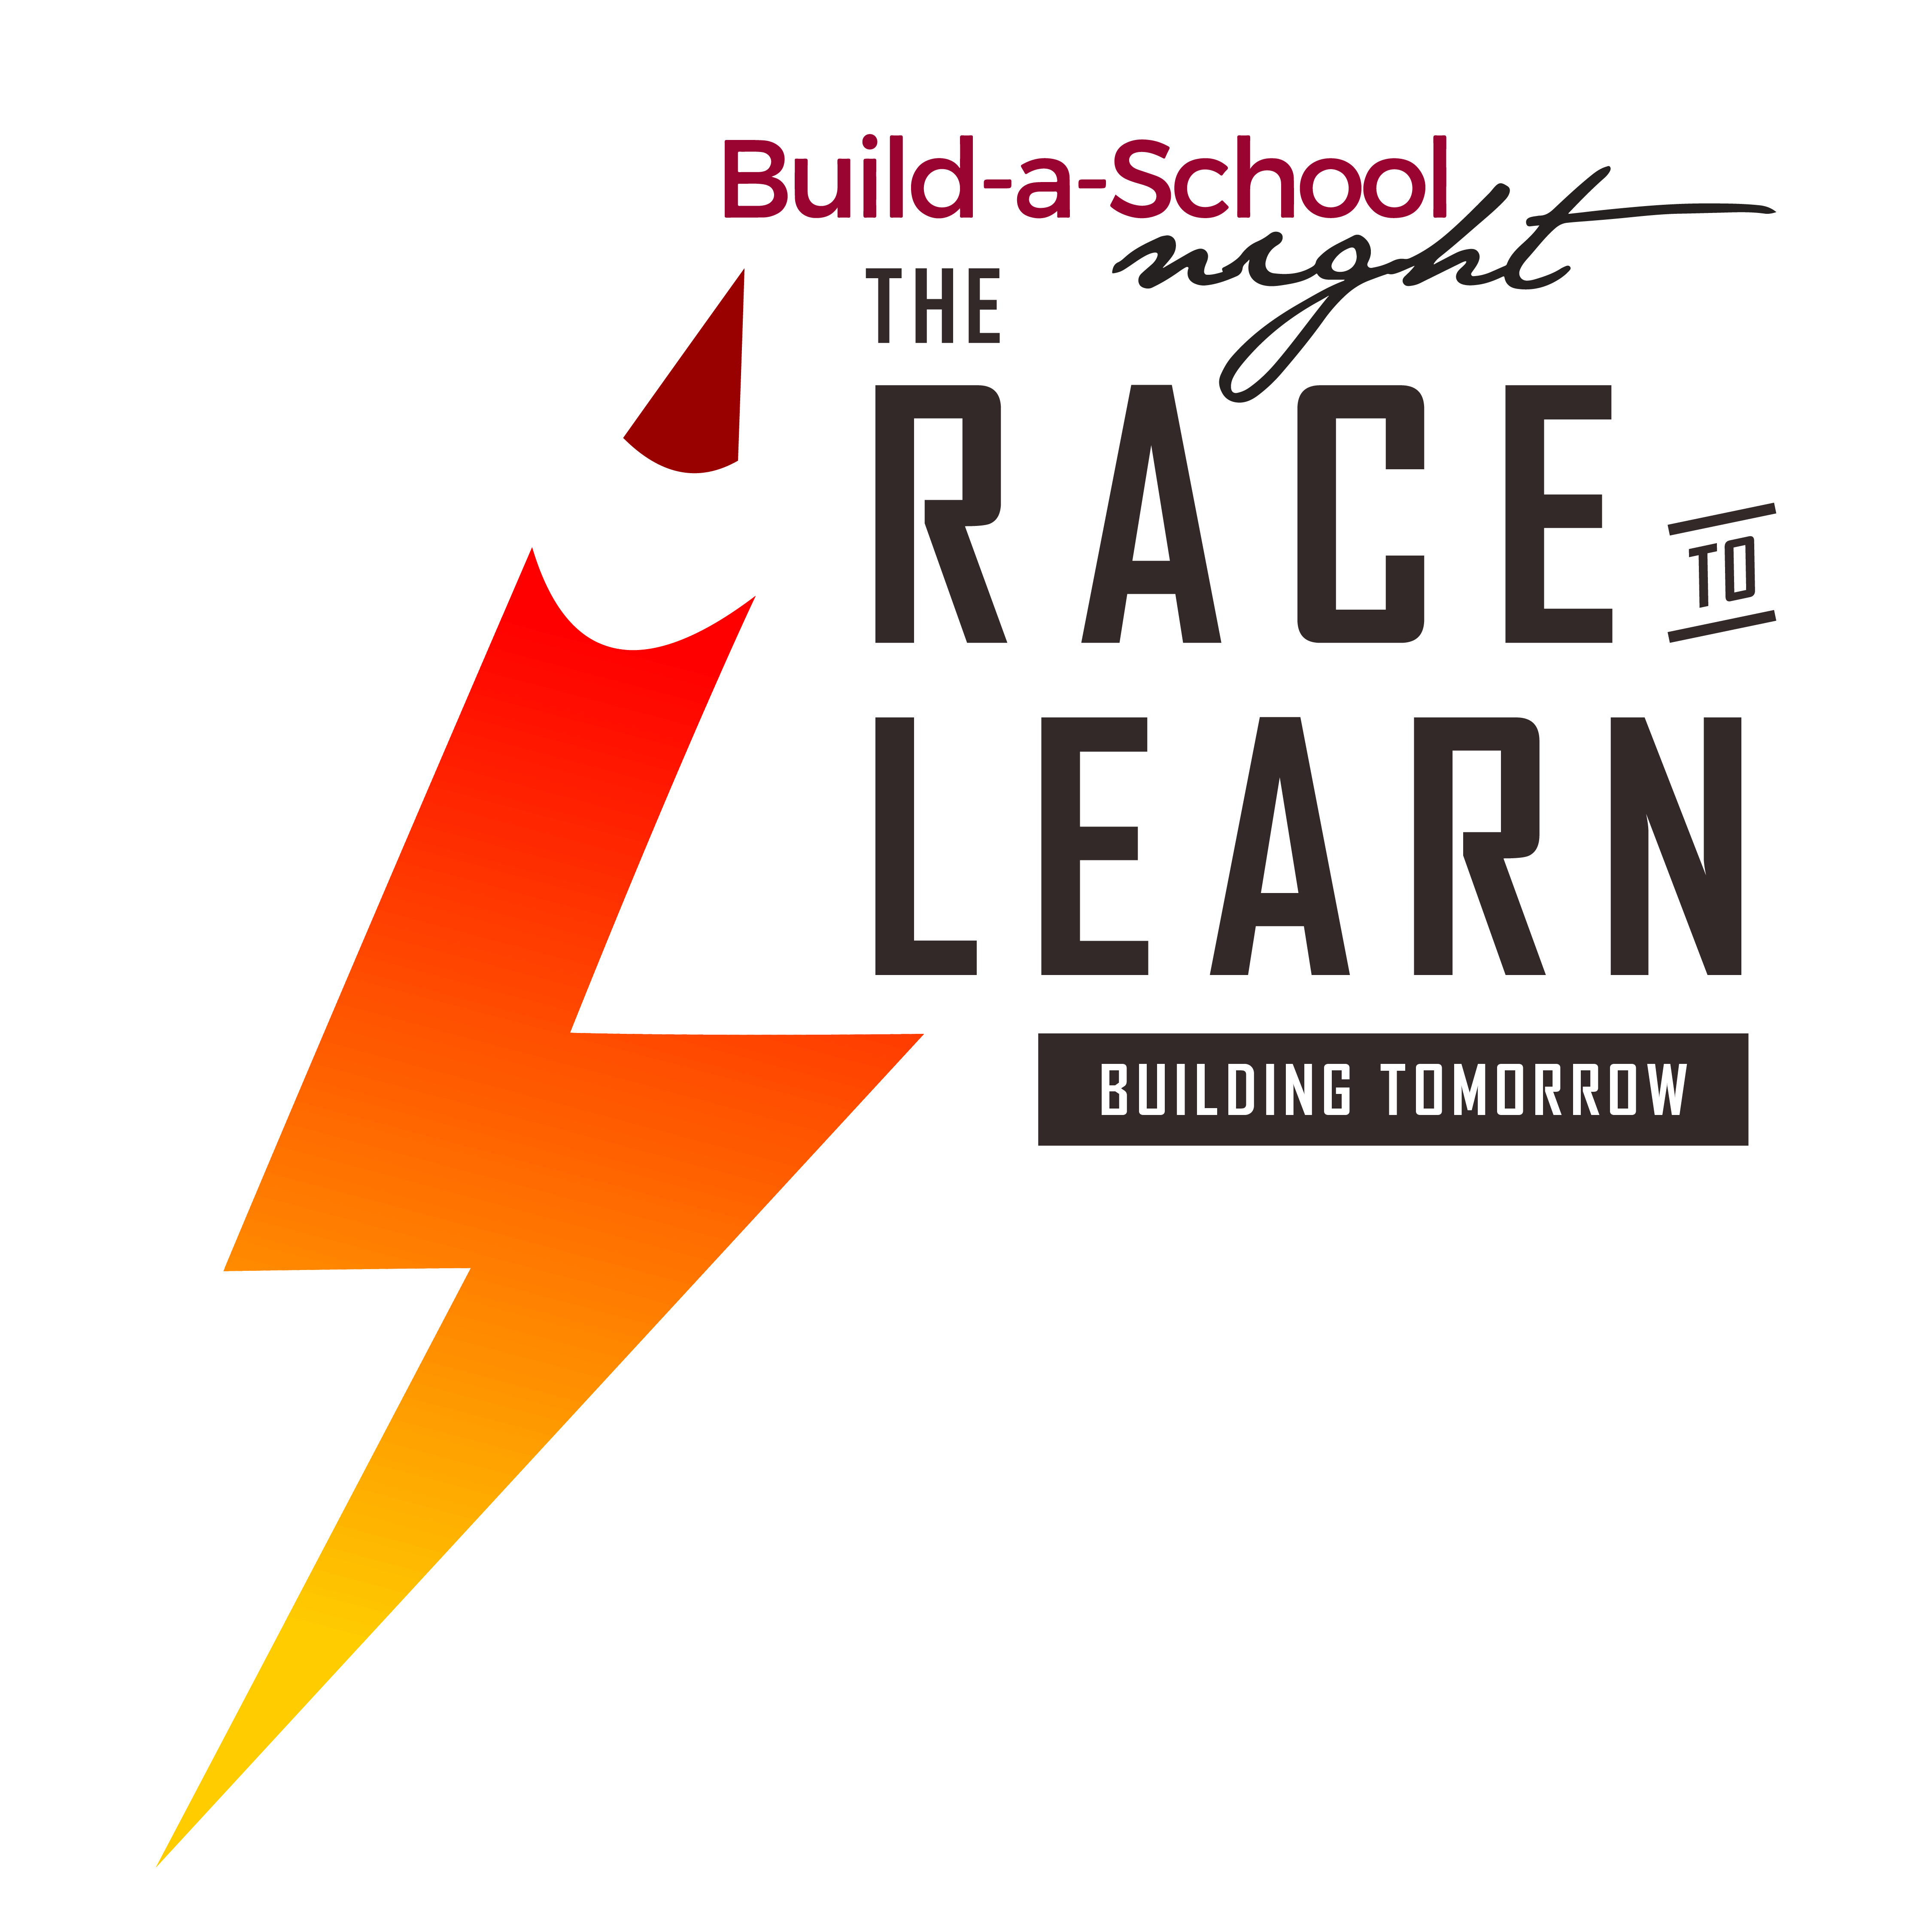 Build-a-School Night 2022: The Race to Learn